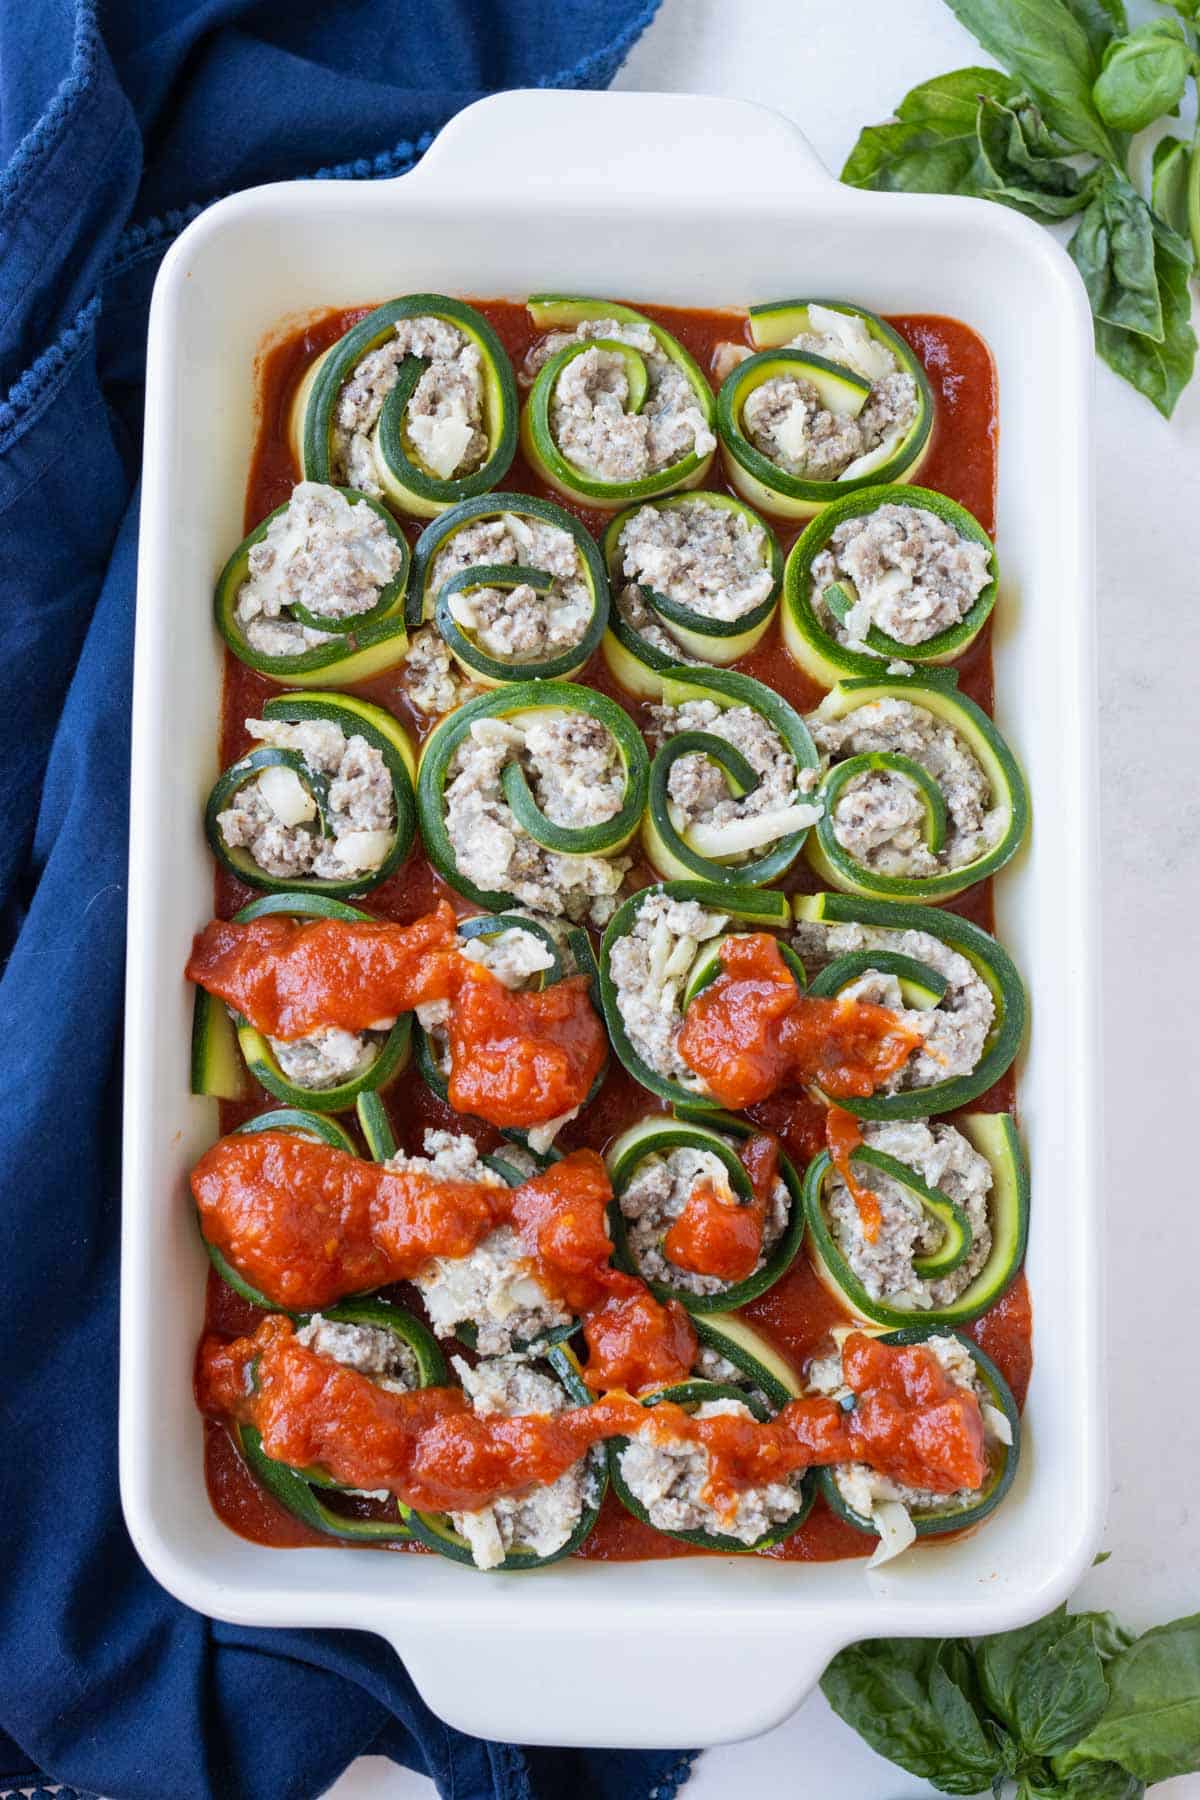 Rolled zucchini lasagna pieces are covered with red sauce.